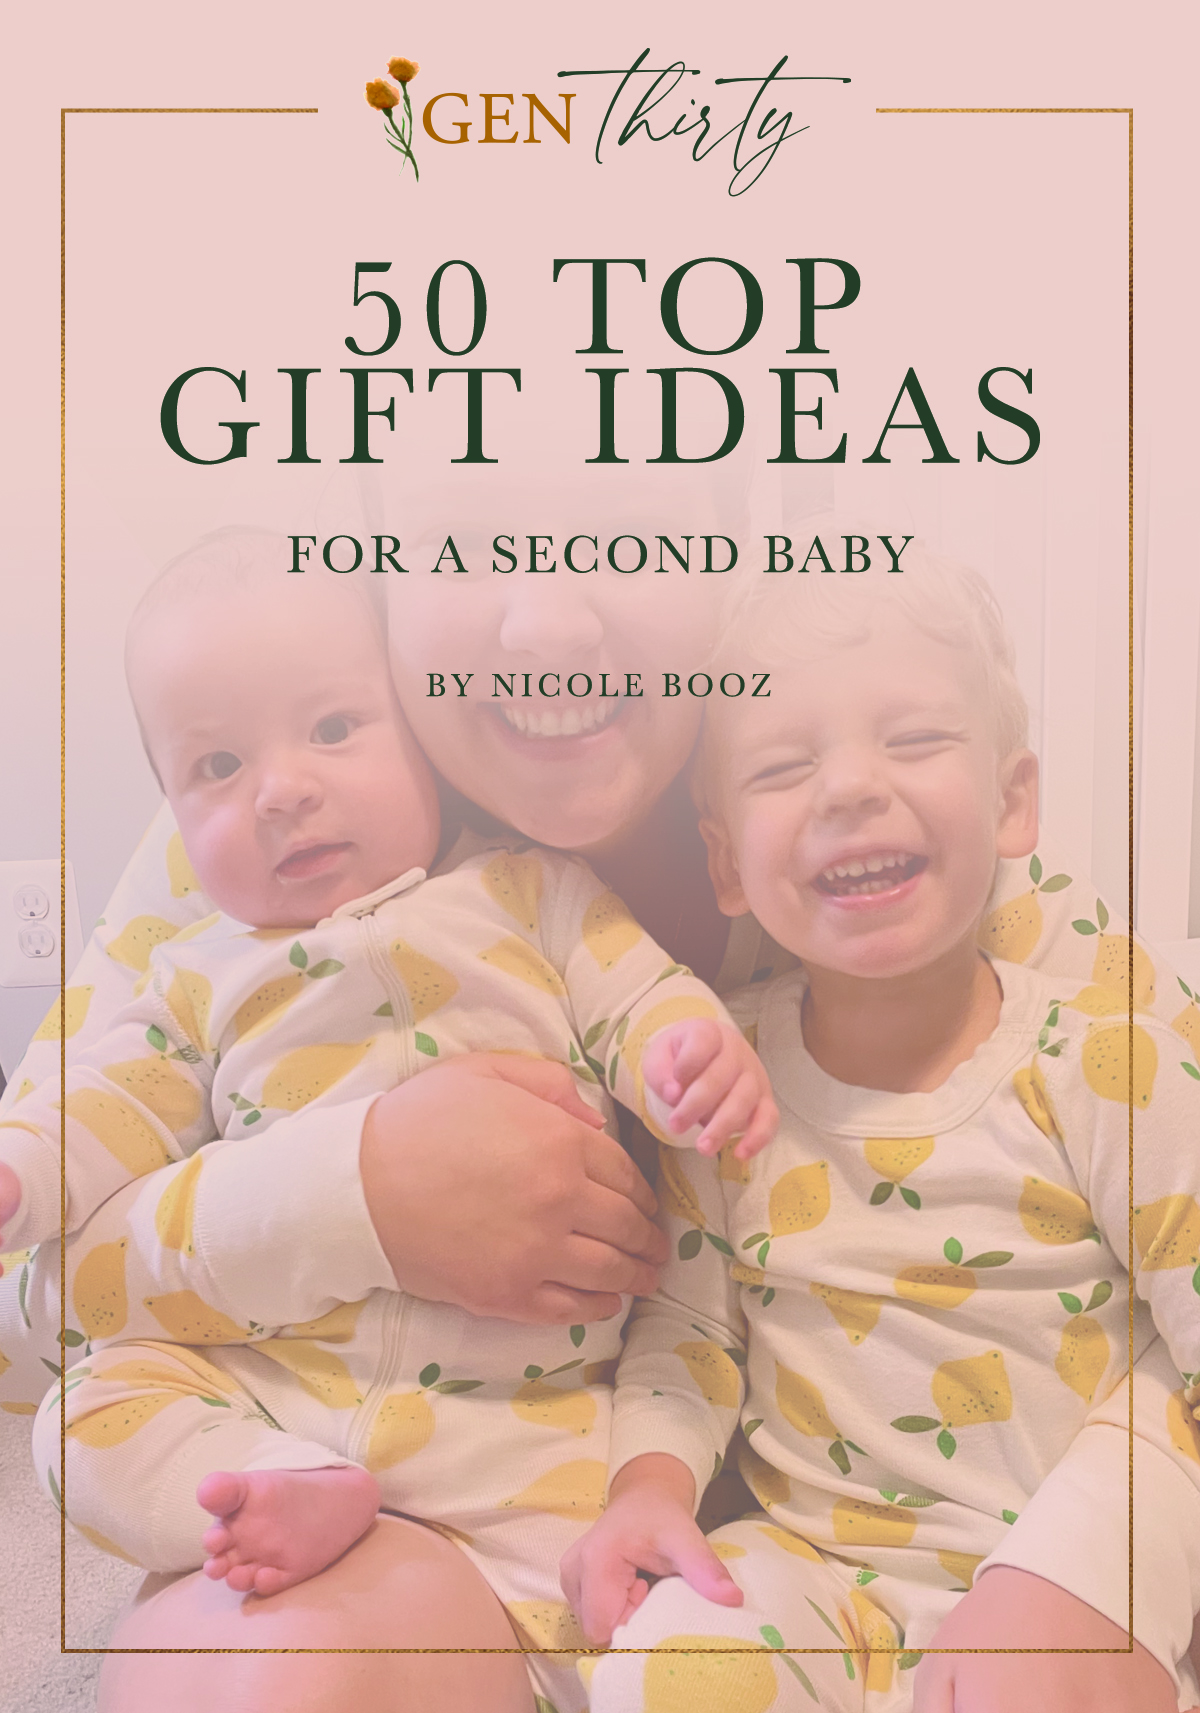 50 Best Gifts For Second Baby - Top Picks For Mom and Baby